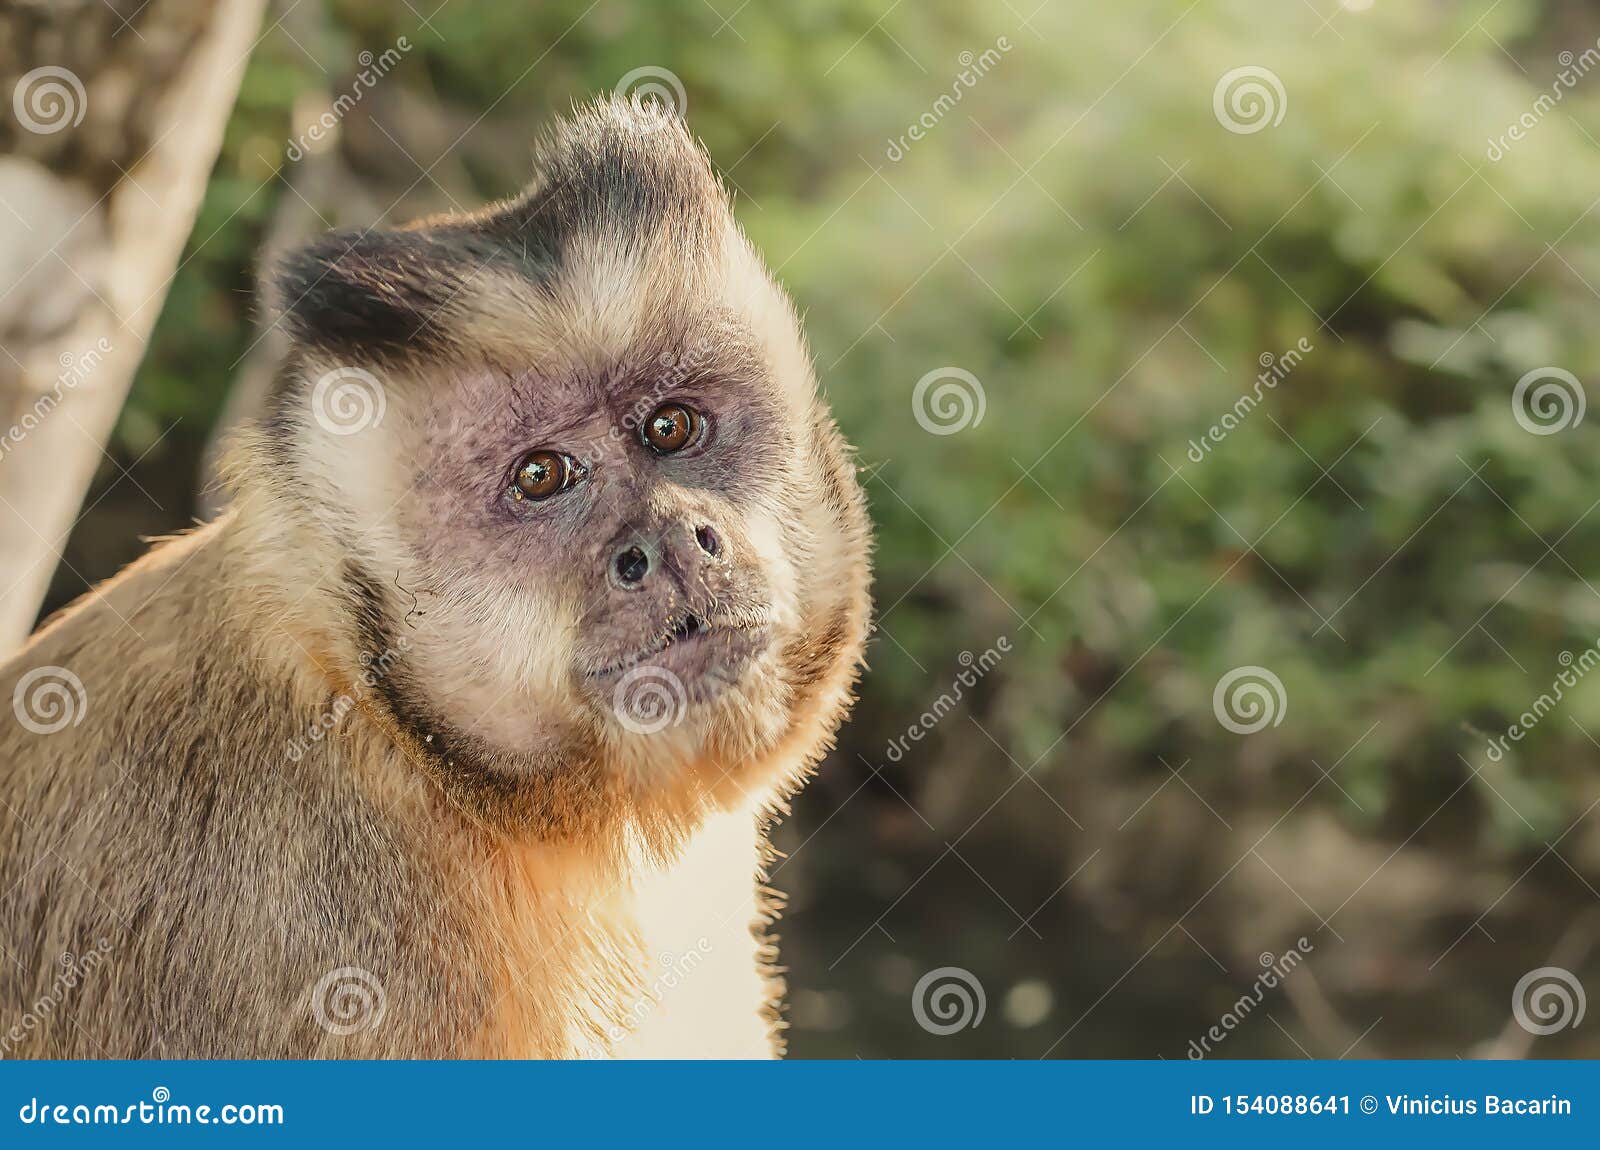 110+ Macaco Prego Stock Photos, Pictures & Royalty-Free Images